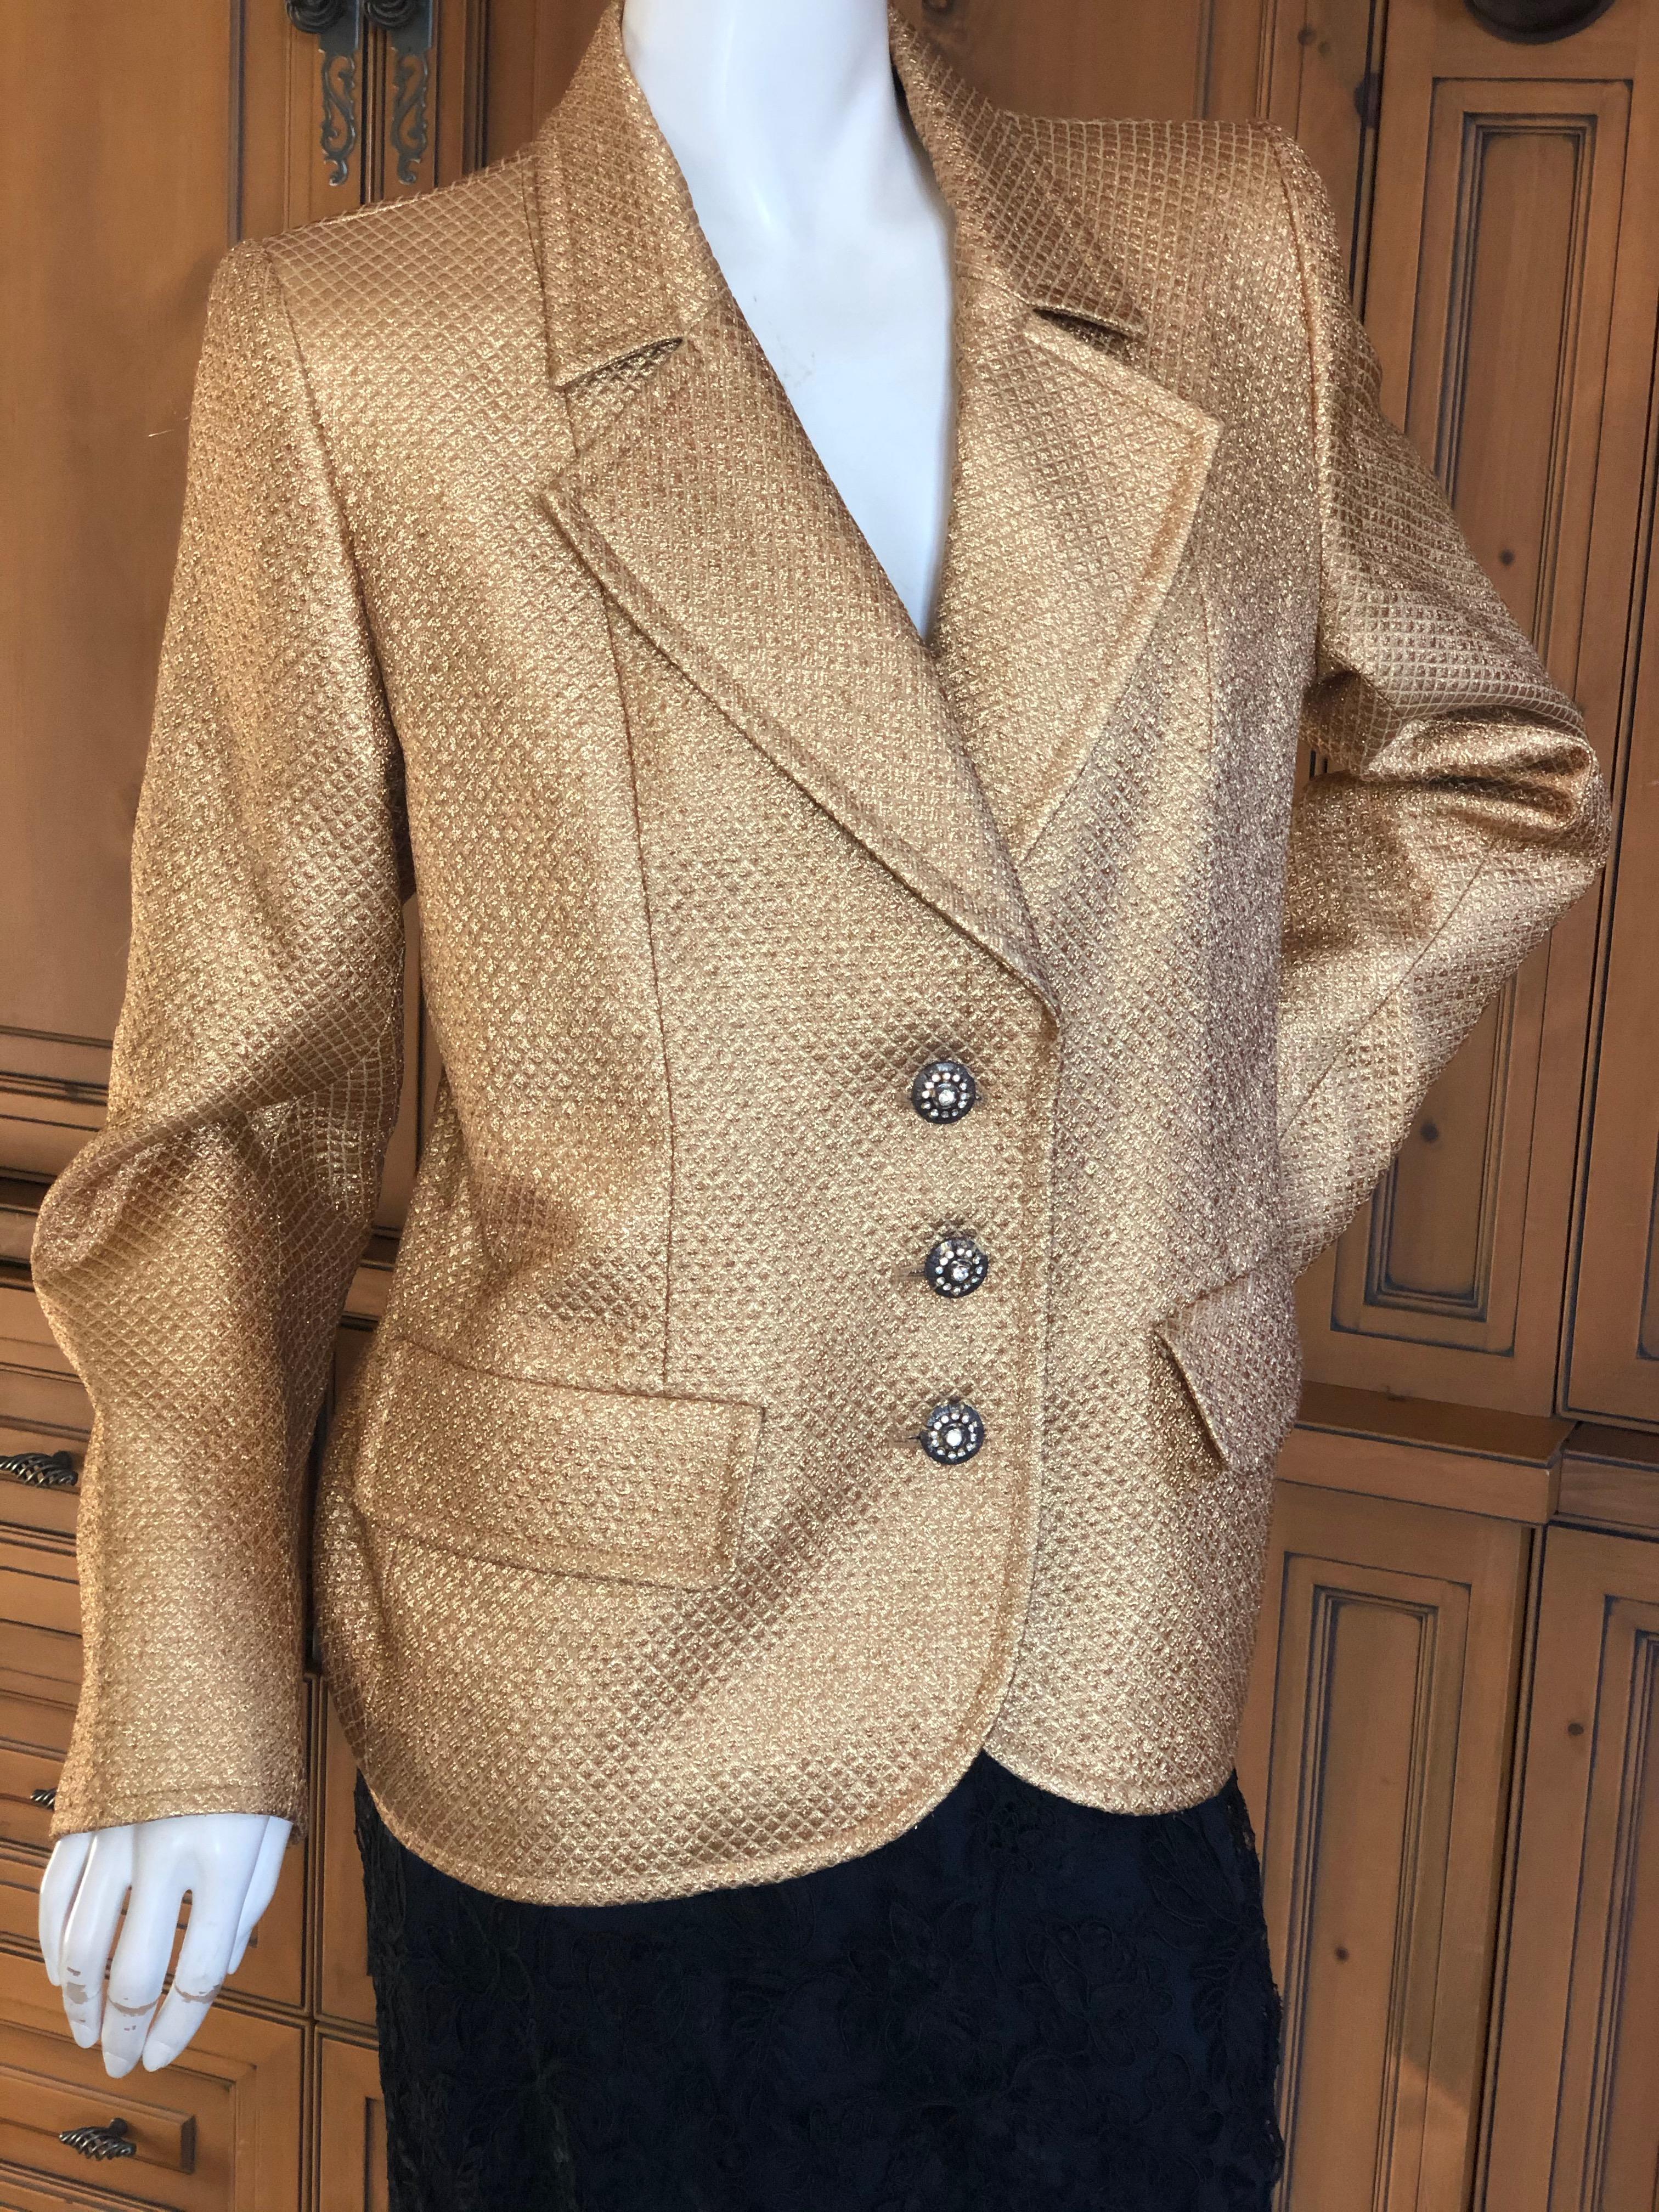 Yves Saint Laurent 1980's Gold Jacquard Jacket with Crystal Buttons In Excellent Condition For Sale In Cloverdale, CA